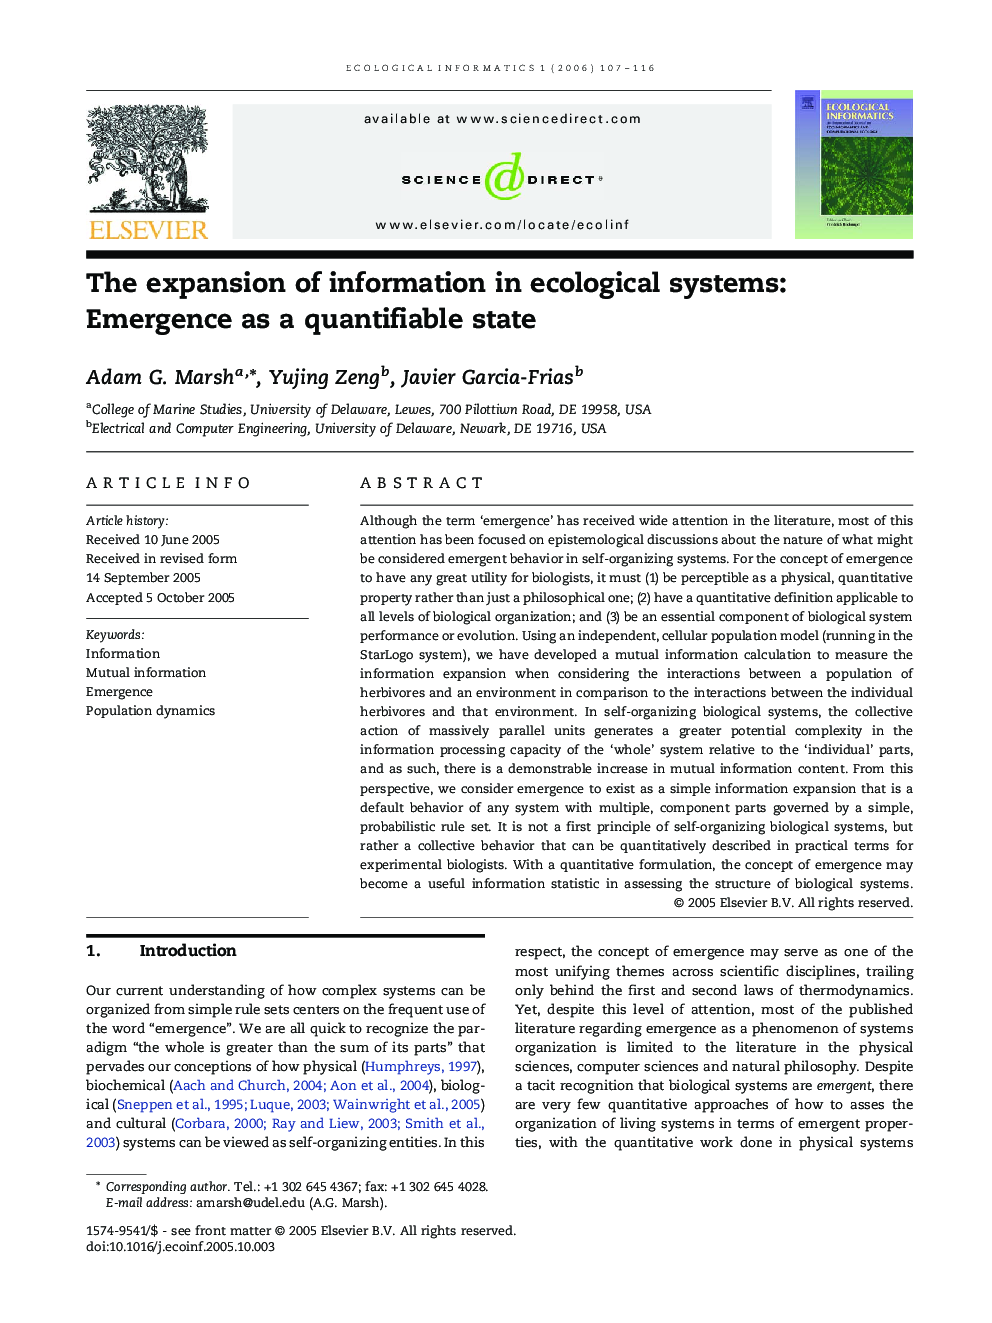 The expansion of information in ecological systems: Emergence as a quantifiable state